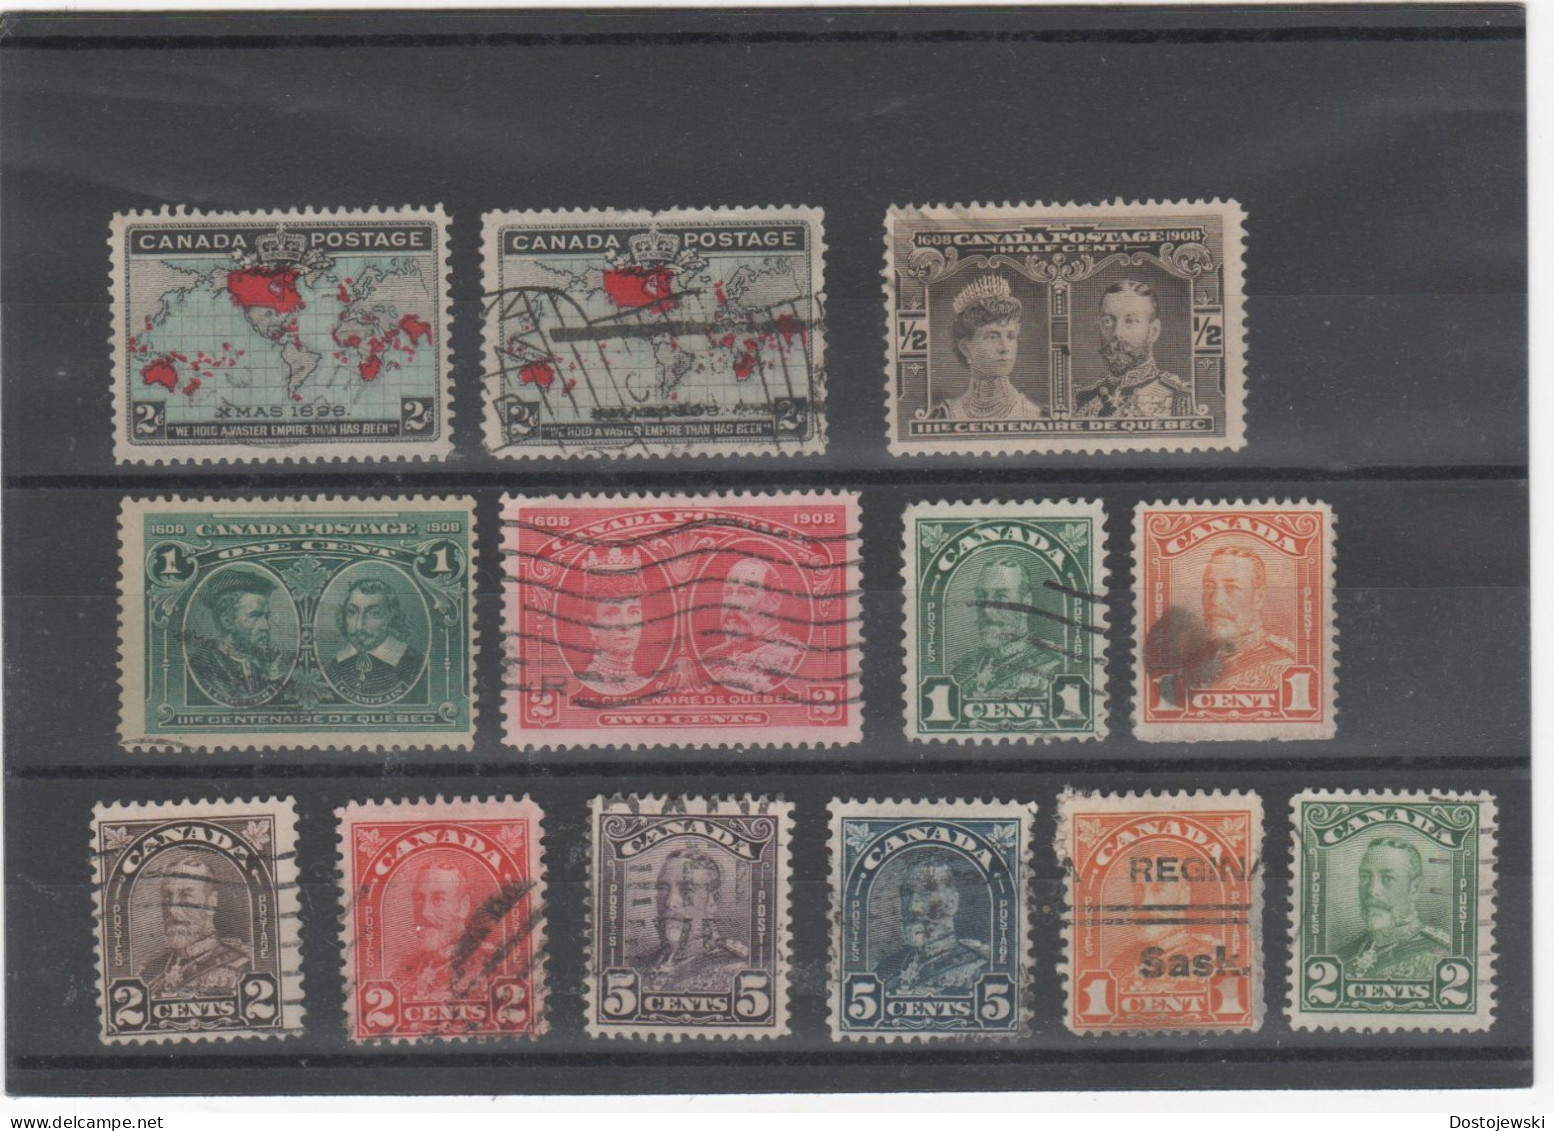 Canada - Kanada, Lot Of Used Stamps Ex 1898-c. 1930, 13 Stamps - Gebraucht